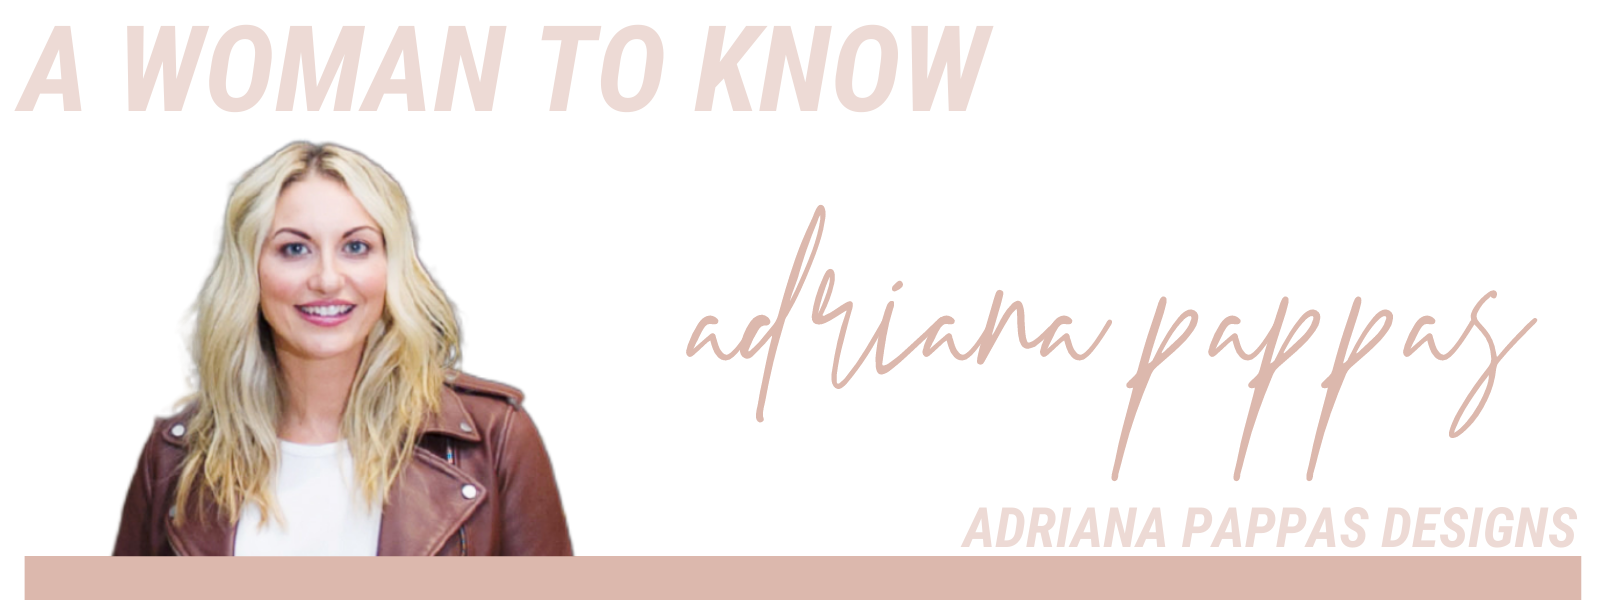 a woman to know - adriana pappas